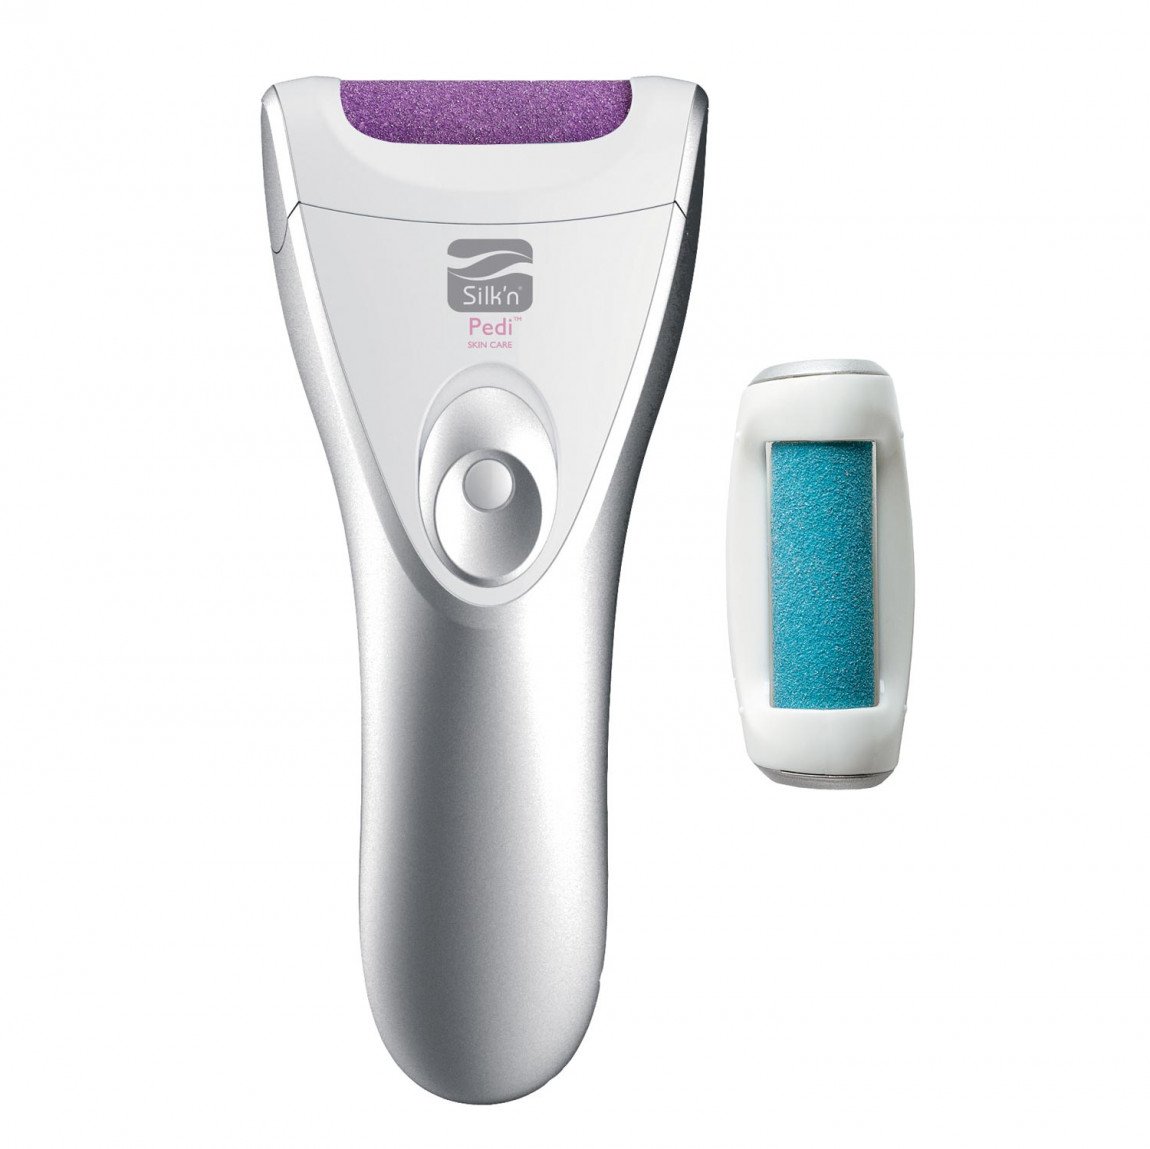 A Review Of The Bario Electric Callus Remover